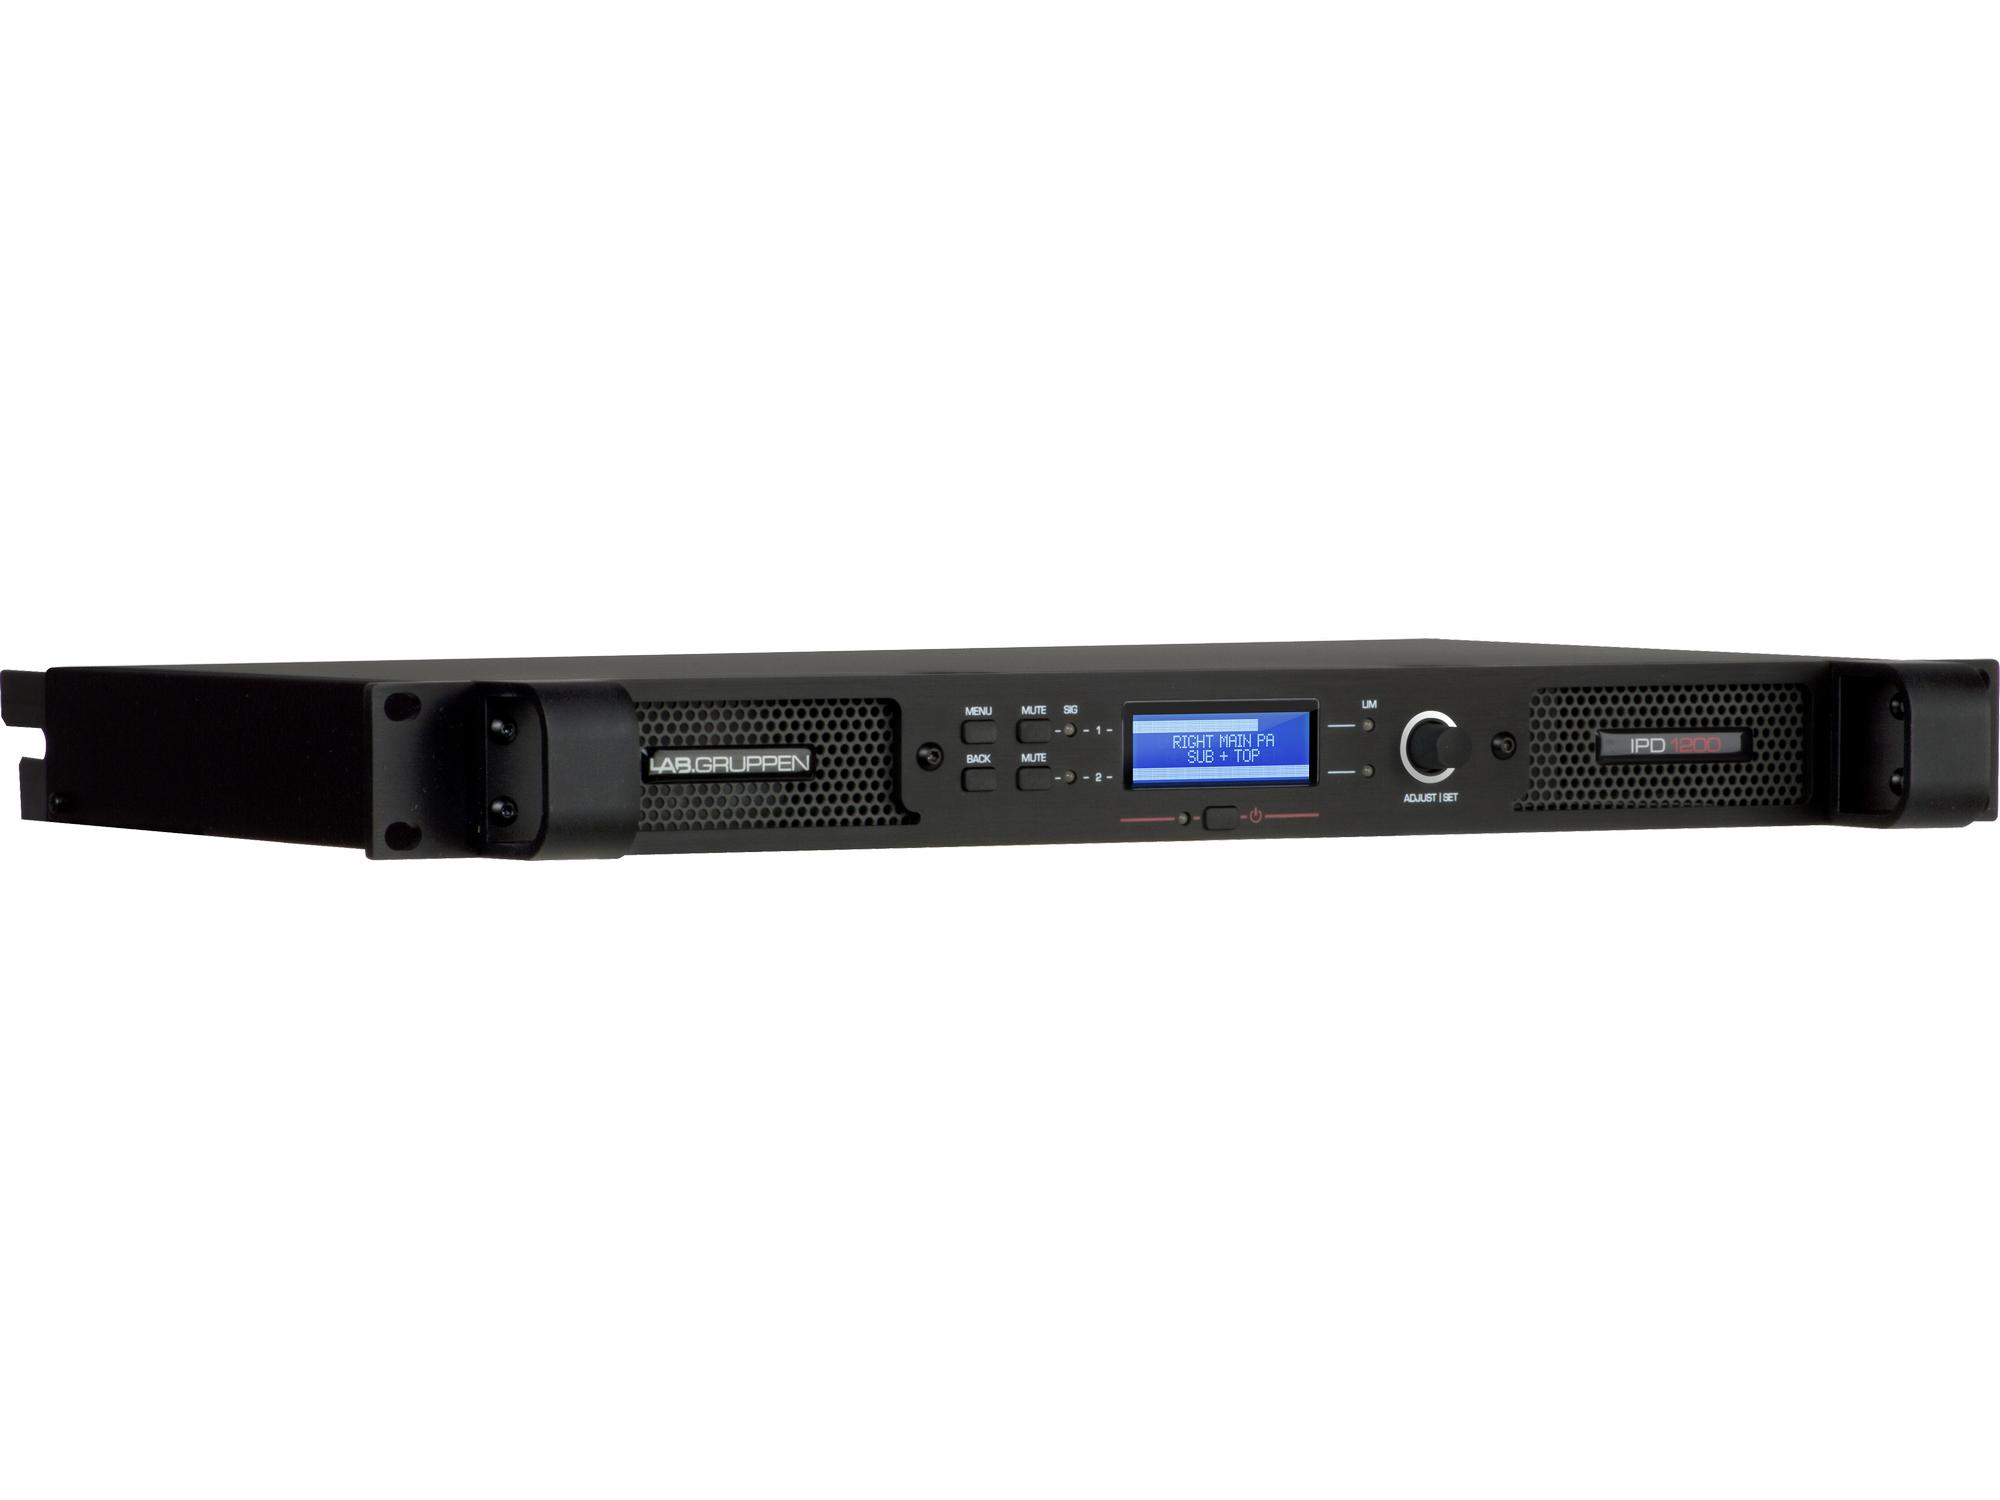 IPD 1200 Compact 1200 Watt 2-Channel DSP Controlled Power Amplifier by Lab.gruppen